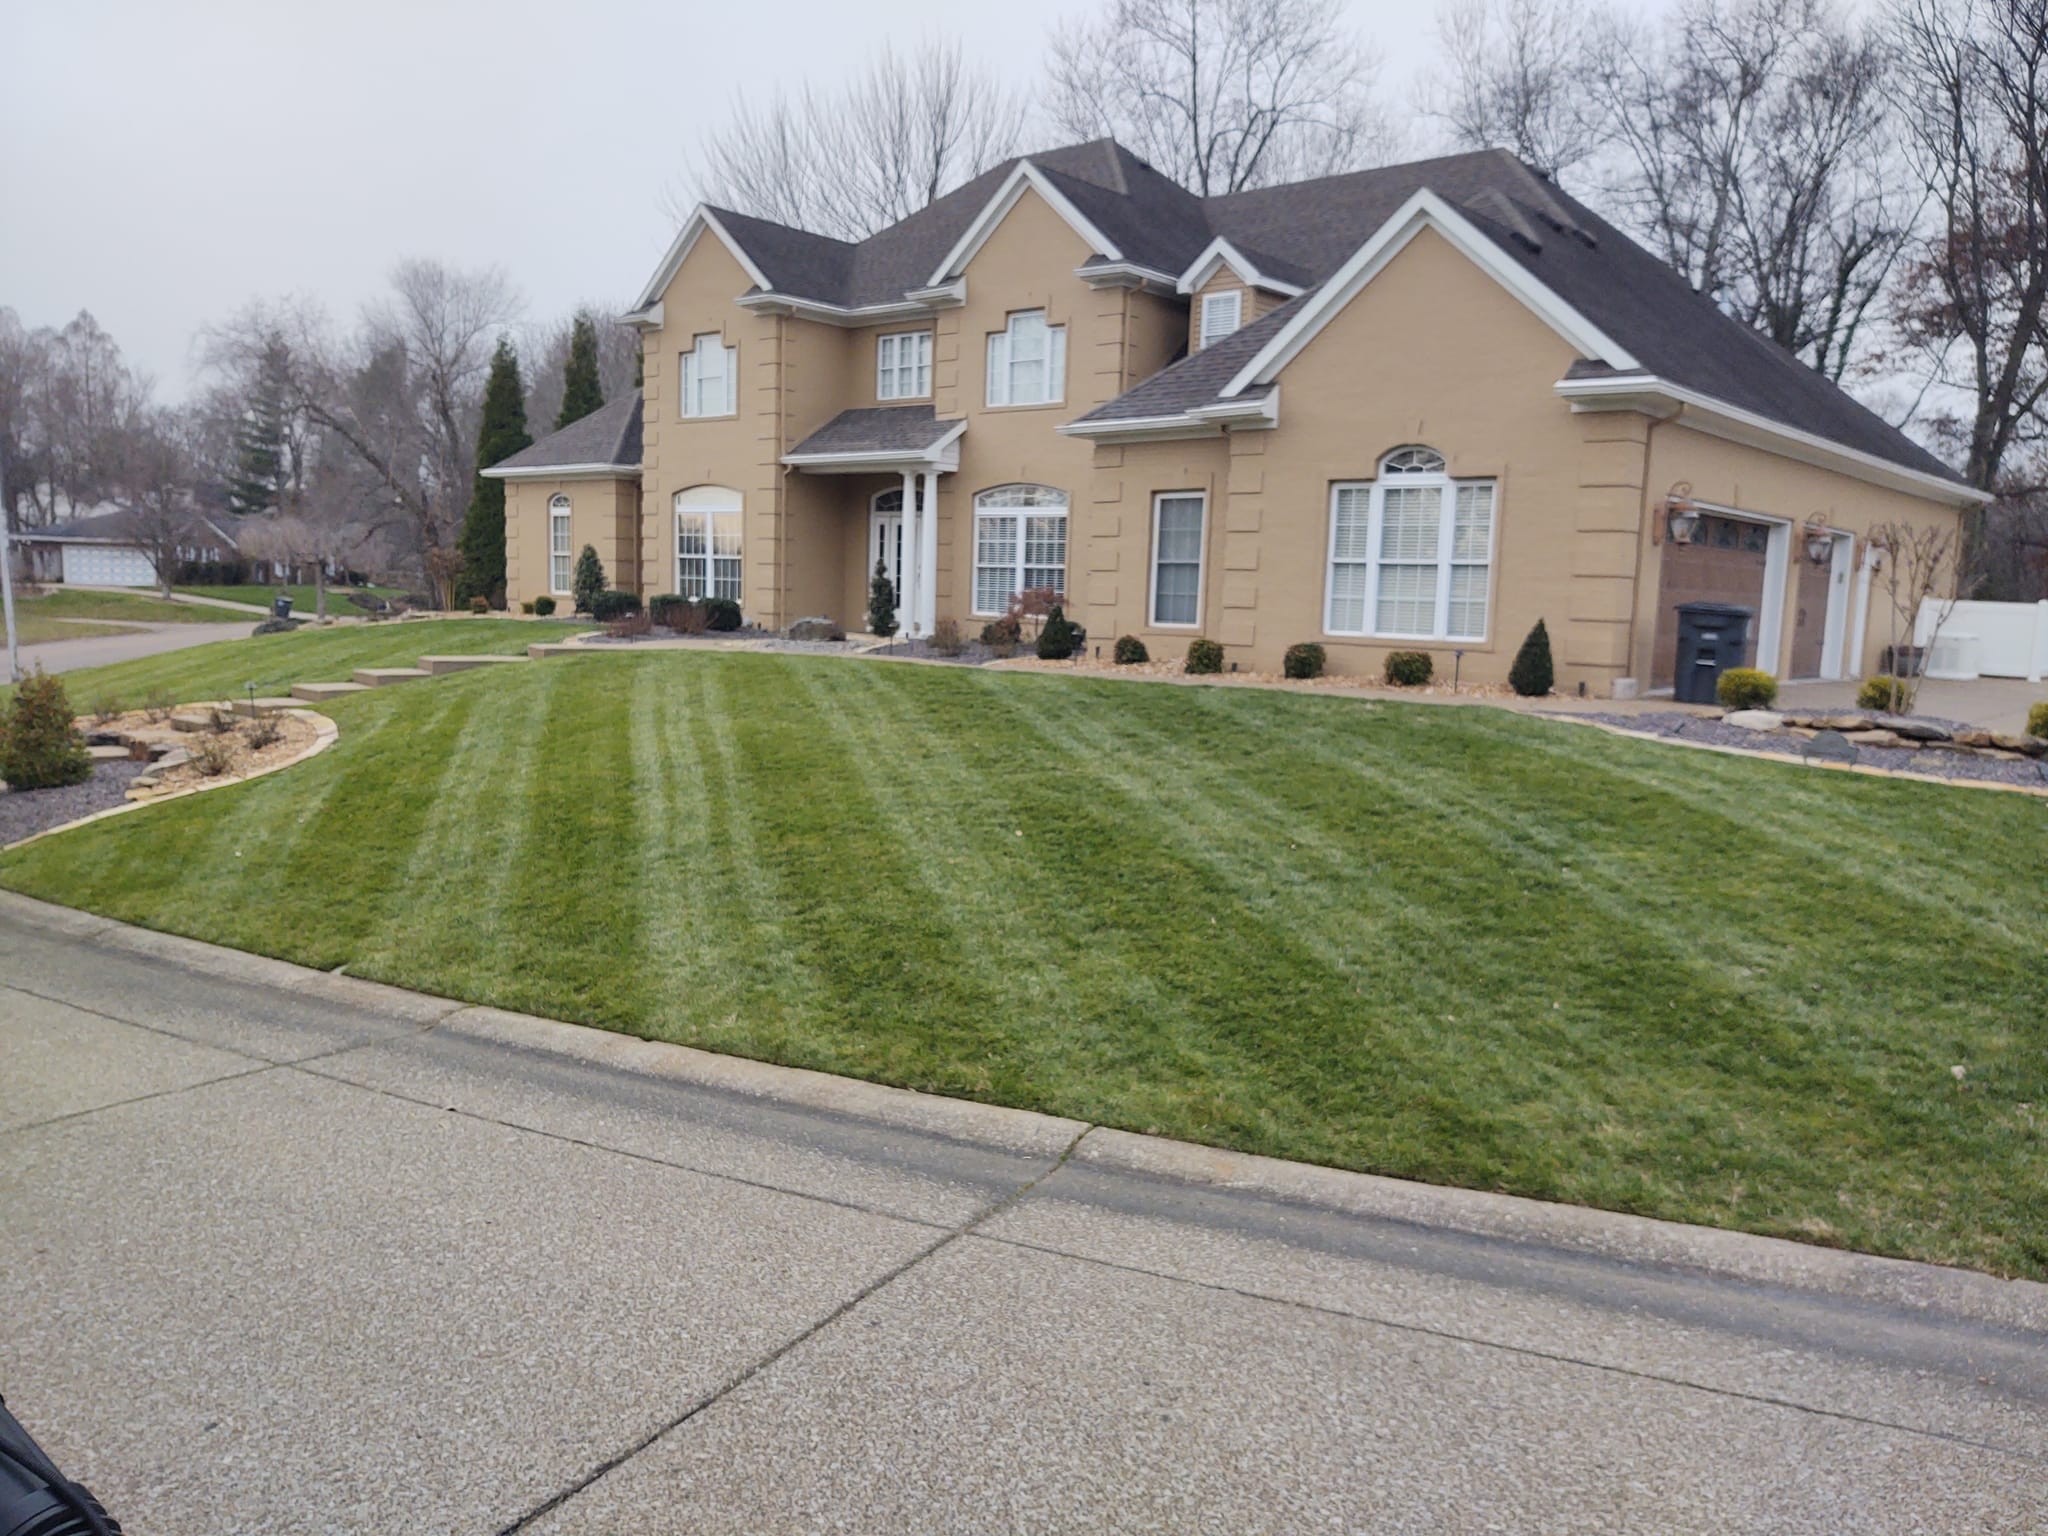 The Grass Guys Complete Lawn Care LLC. team in Evansville, IN - people or person